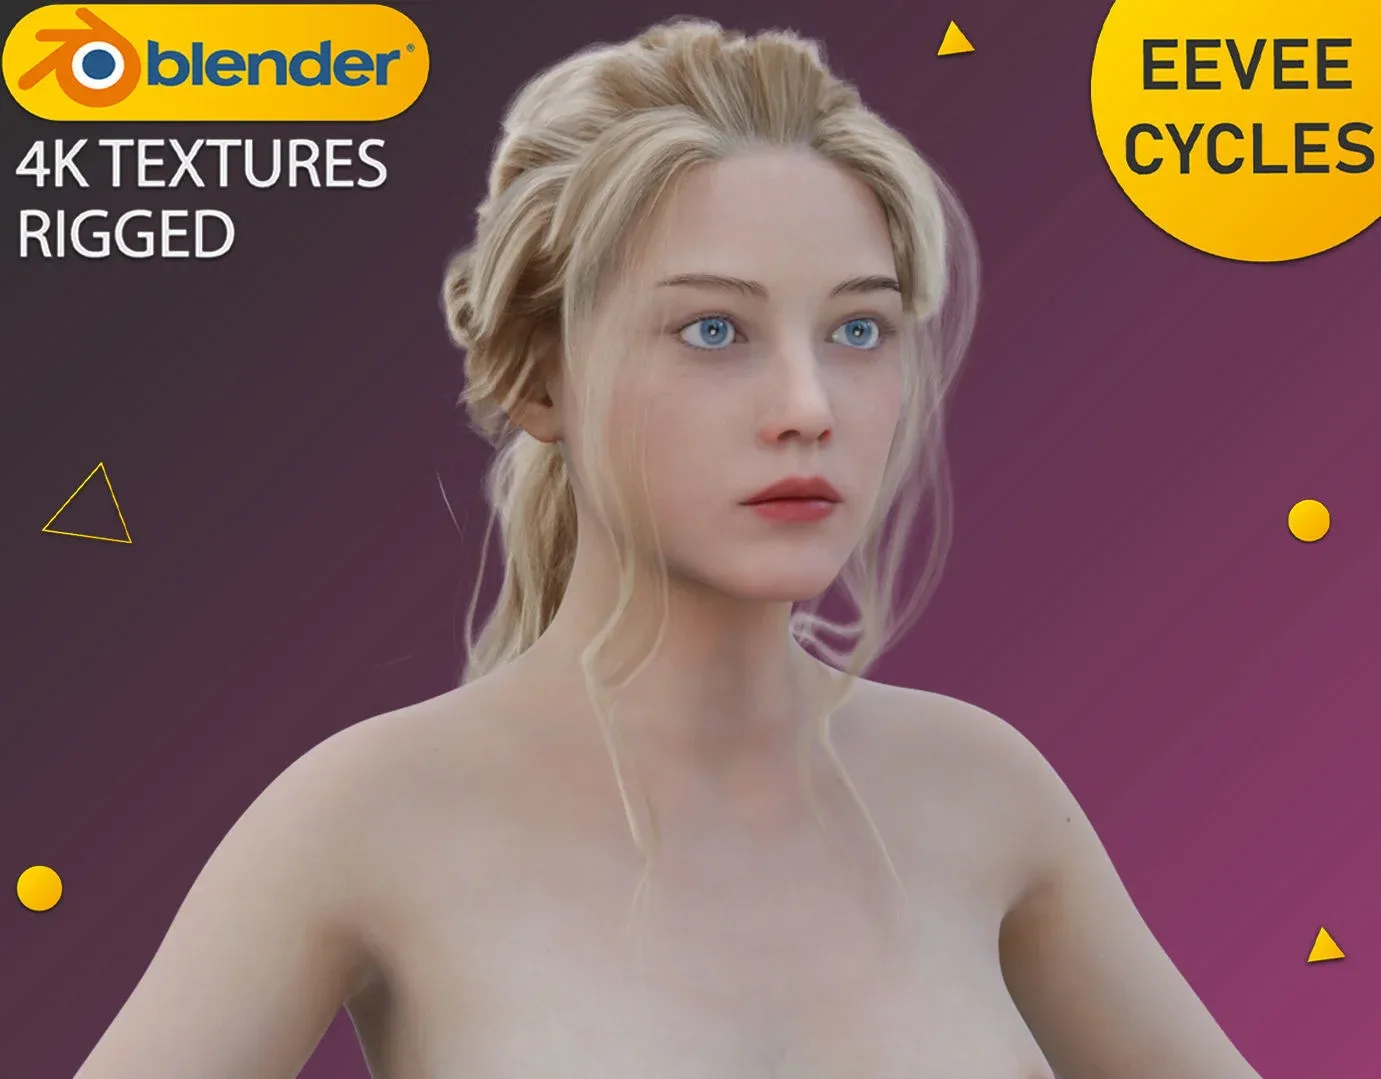 Sexy Hot Chick Blonde Girl with Ponytail Hairstyle - Rigged - 4K Textures